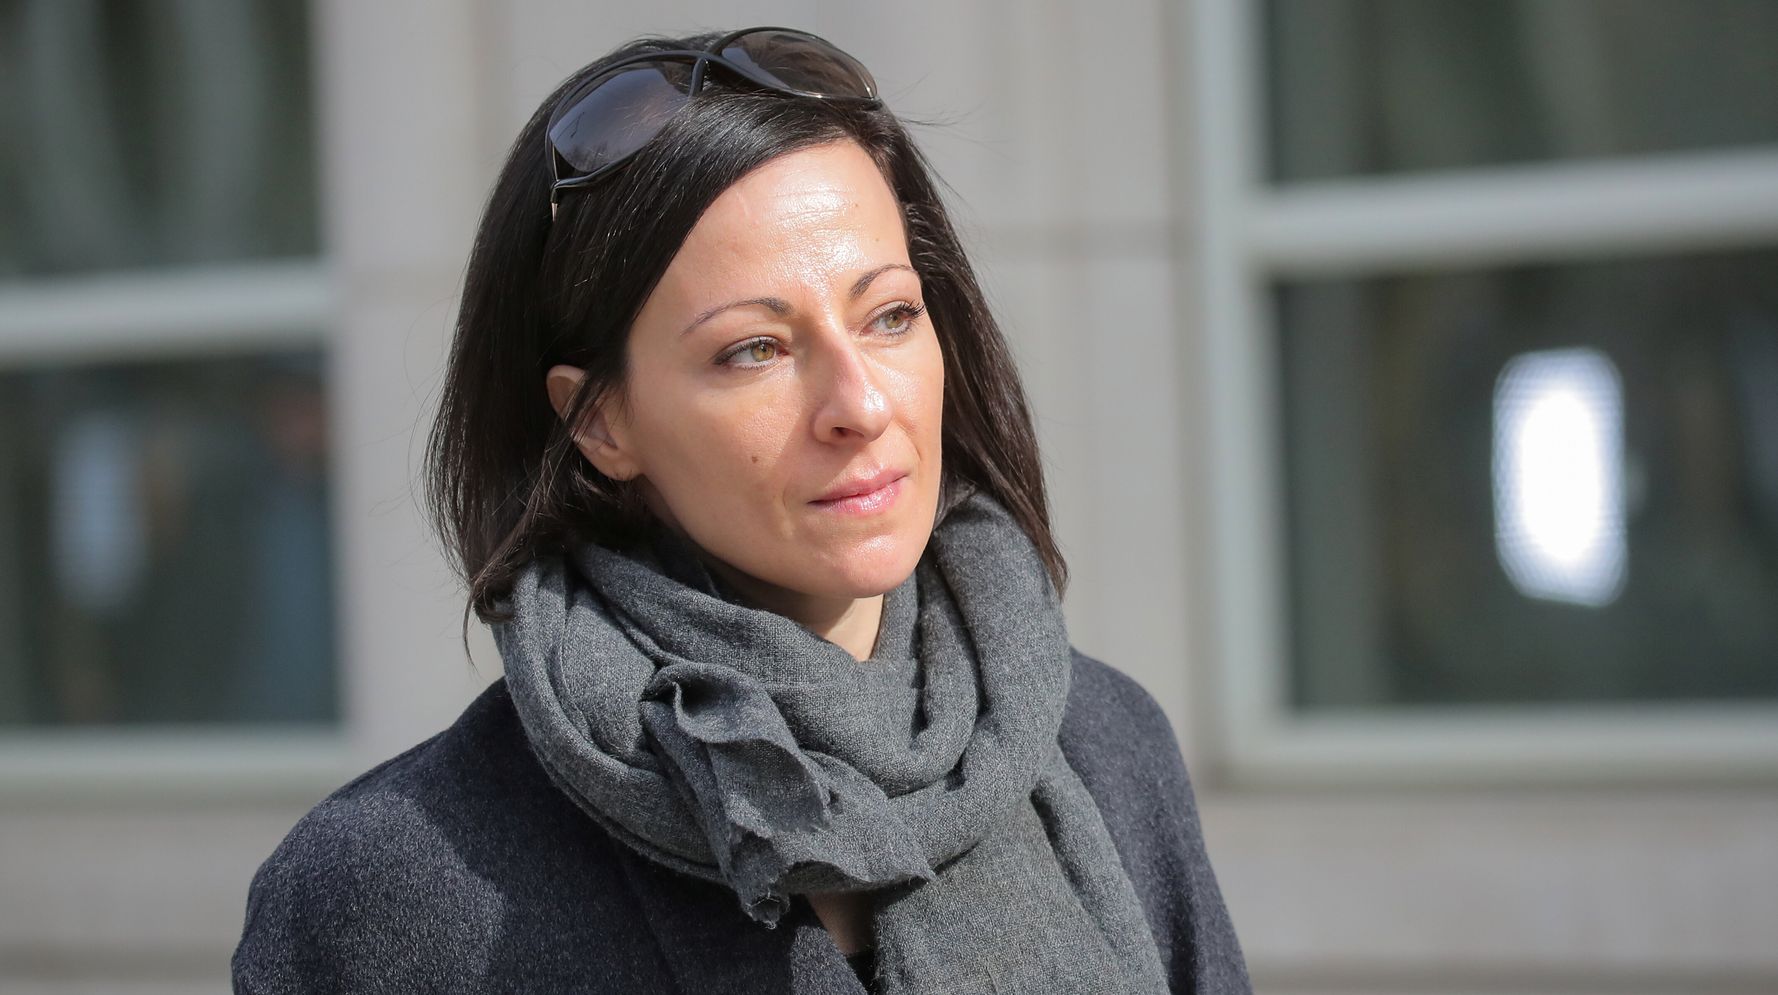 NXIVM Sex Cult Member Who Cooperated With Prosecutors Avoids Prison Time